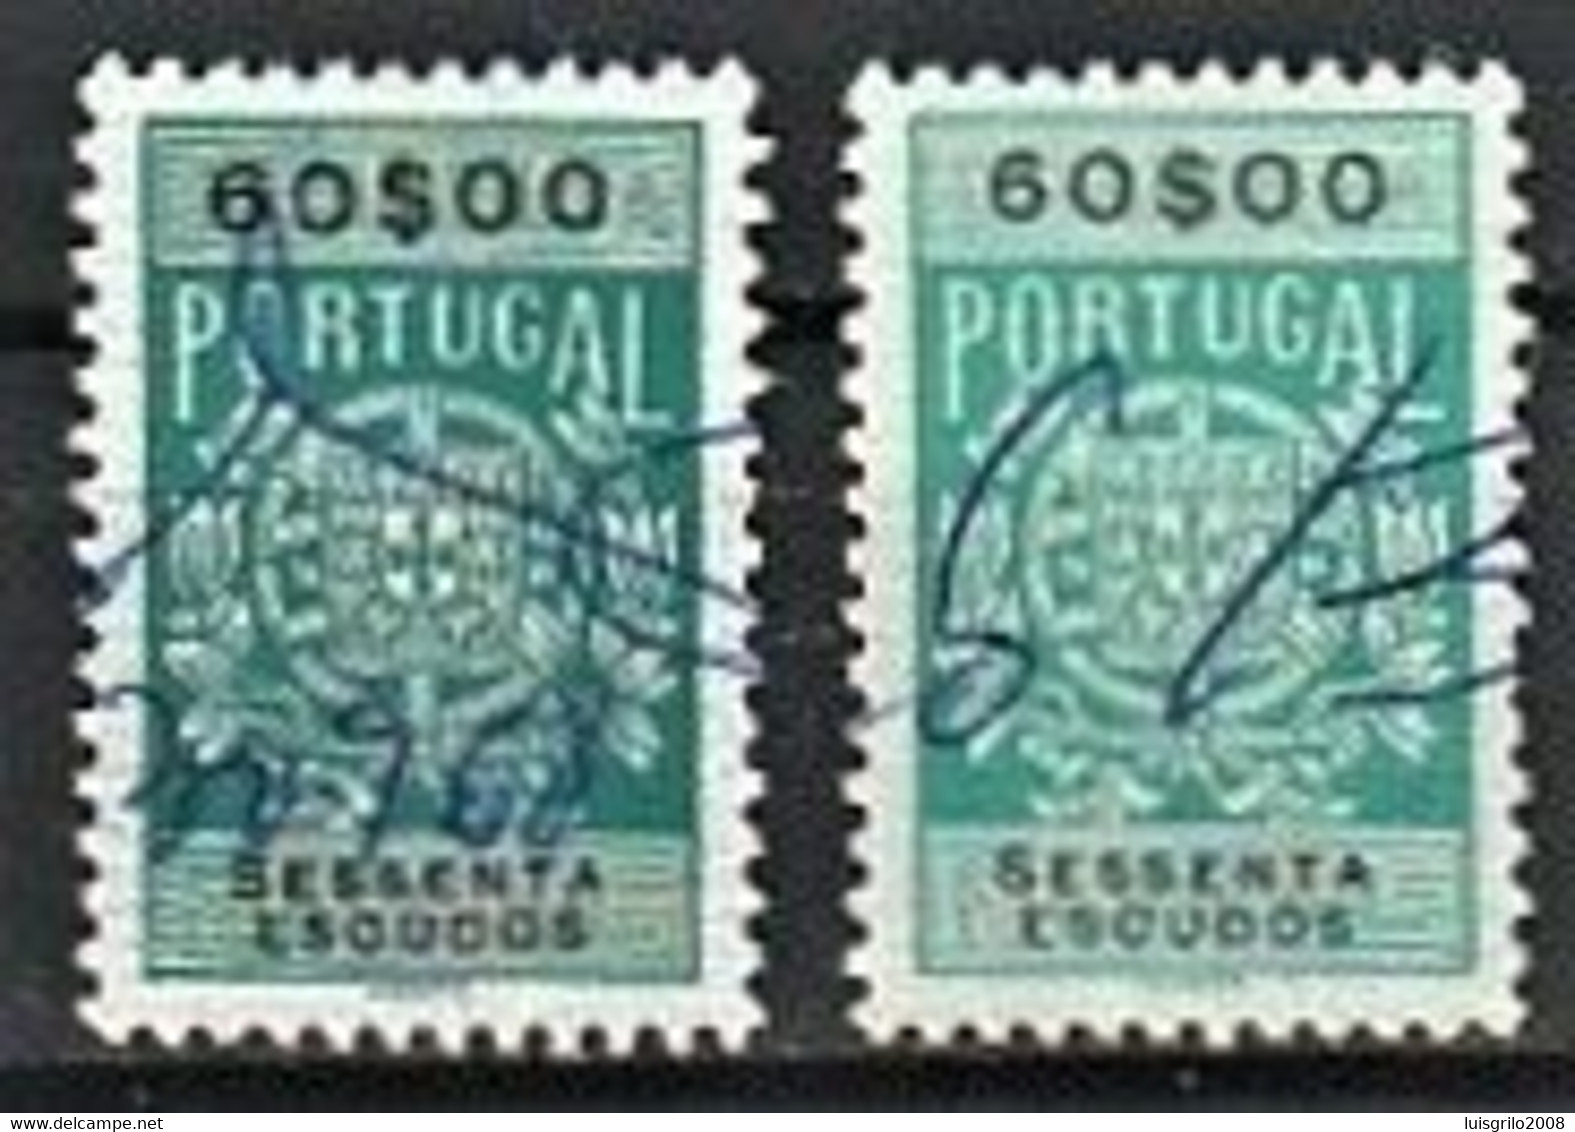 Fiscal/ Revenue, Portugal 1940 - Estampilha Fiscal -|- 60$00 - COLOR VARIANT - Is The Stamp Of The Right - Usado